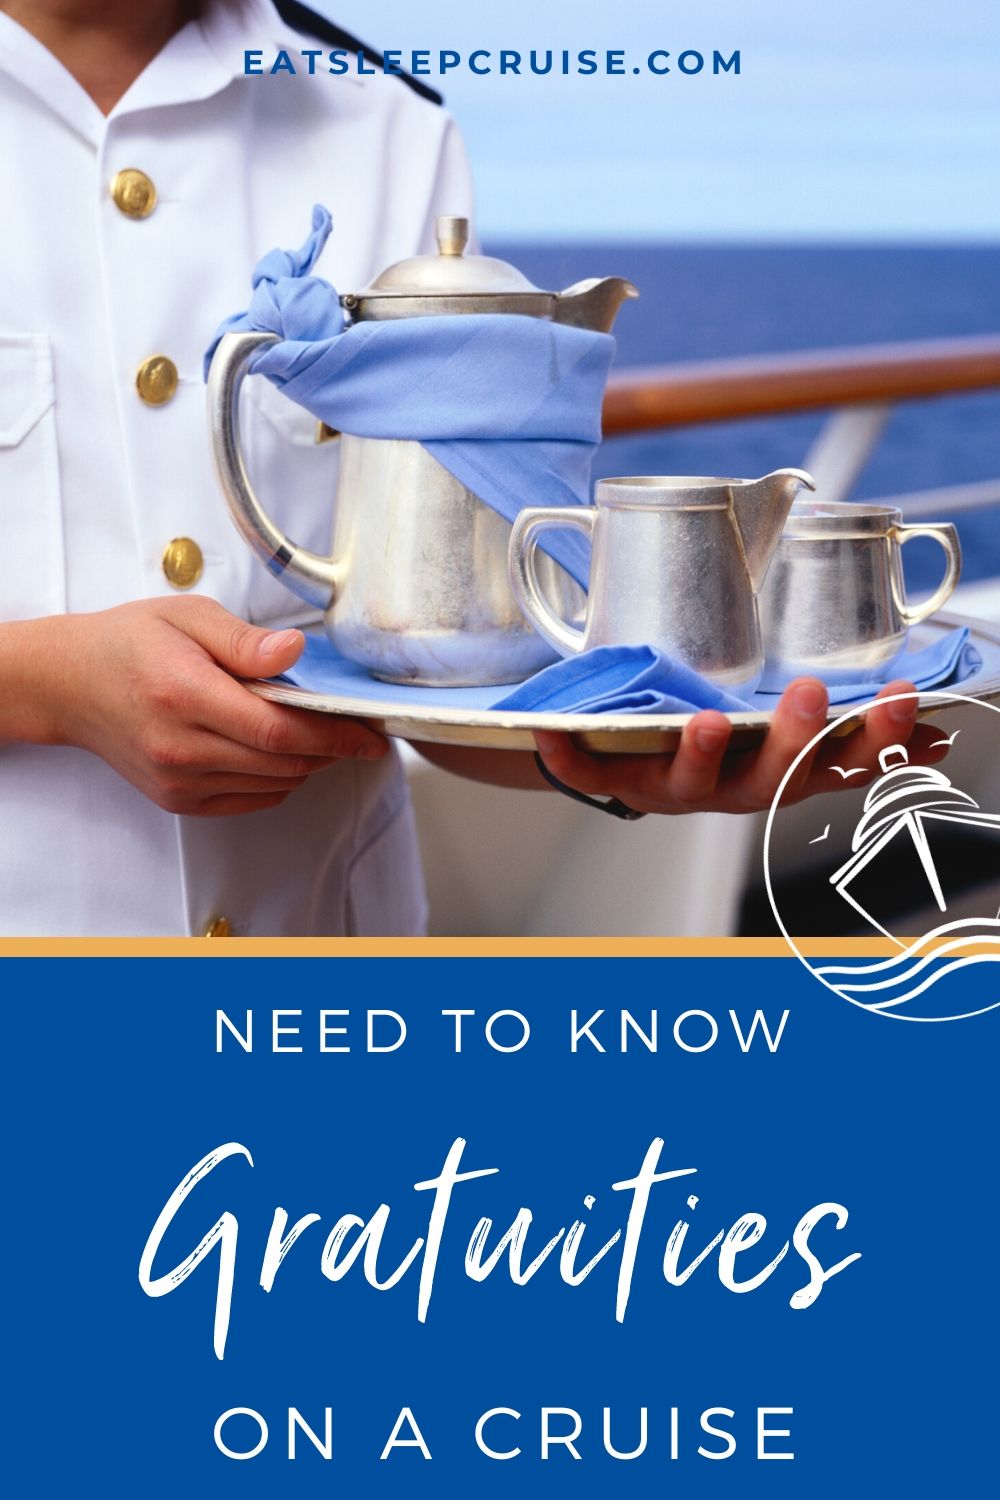 How Much Are Cruise Gratuities in 2023?